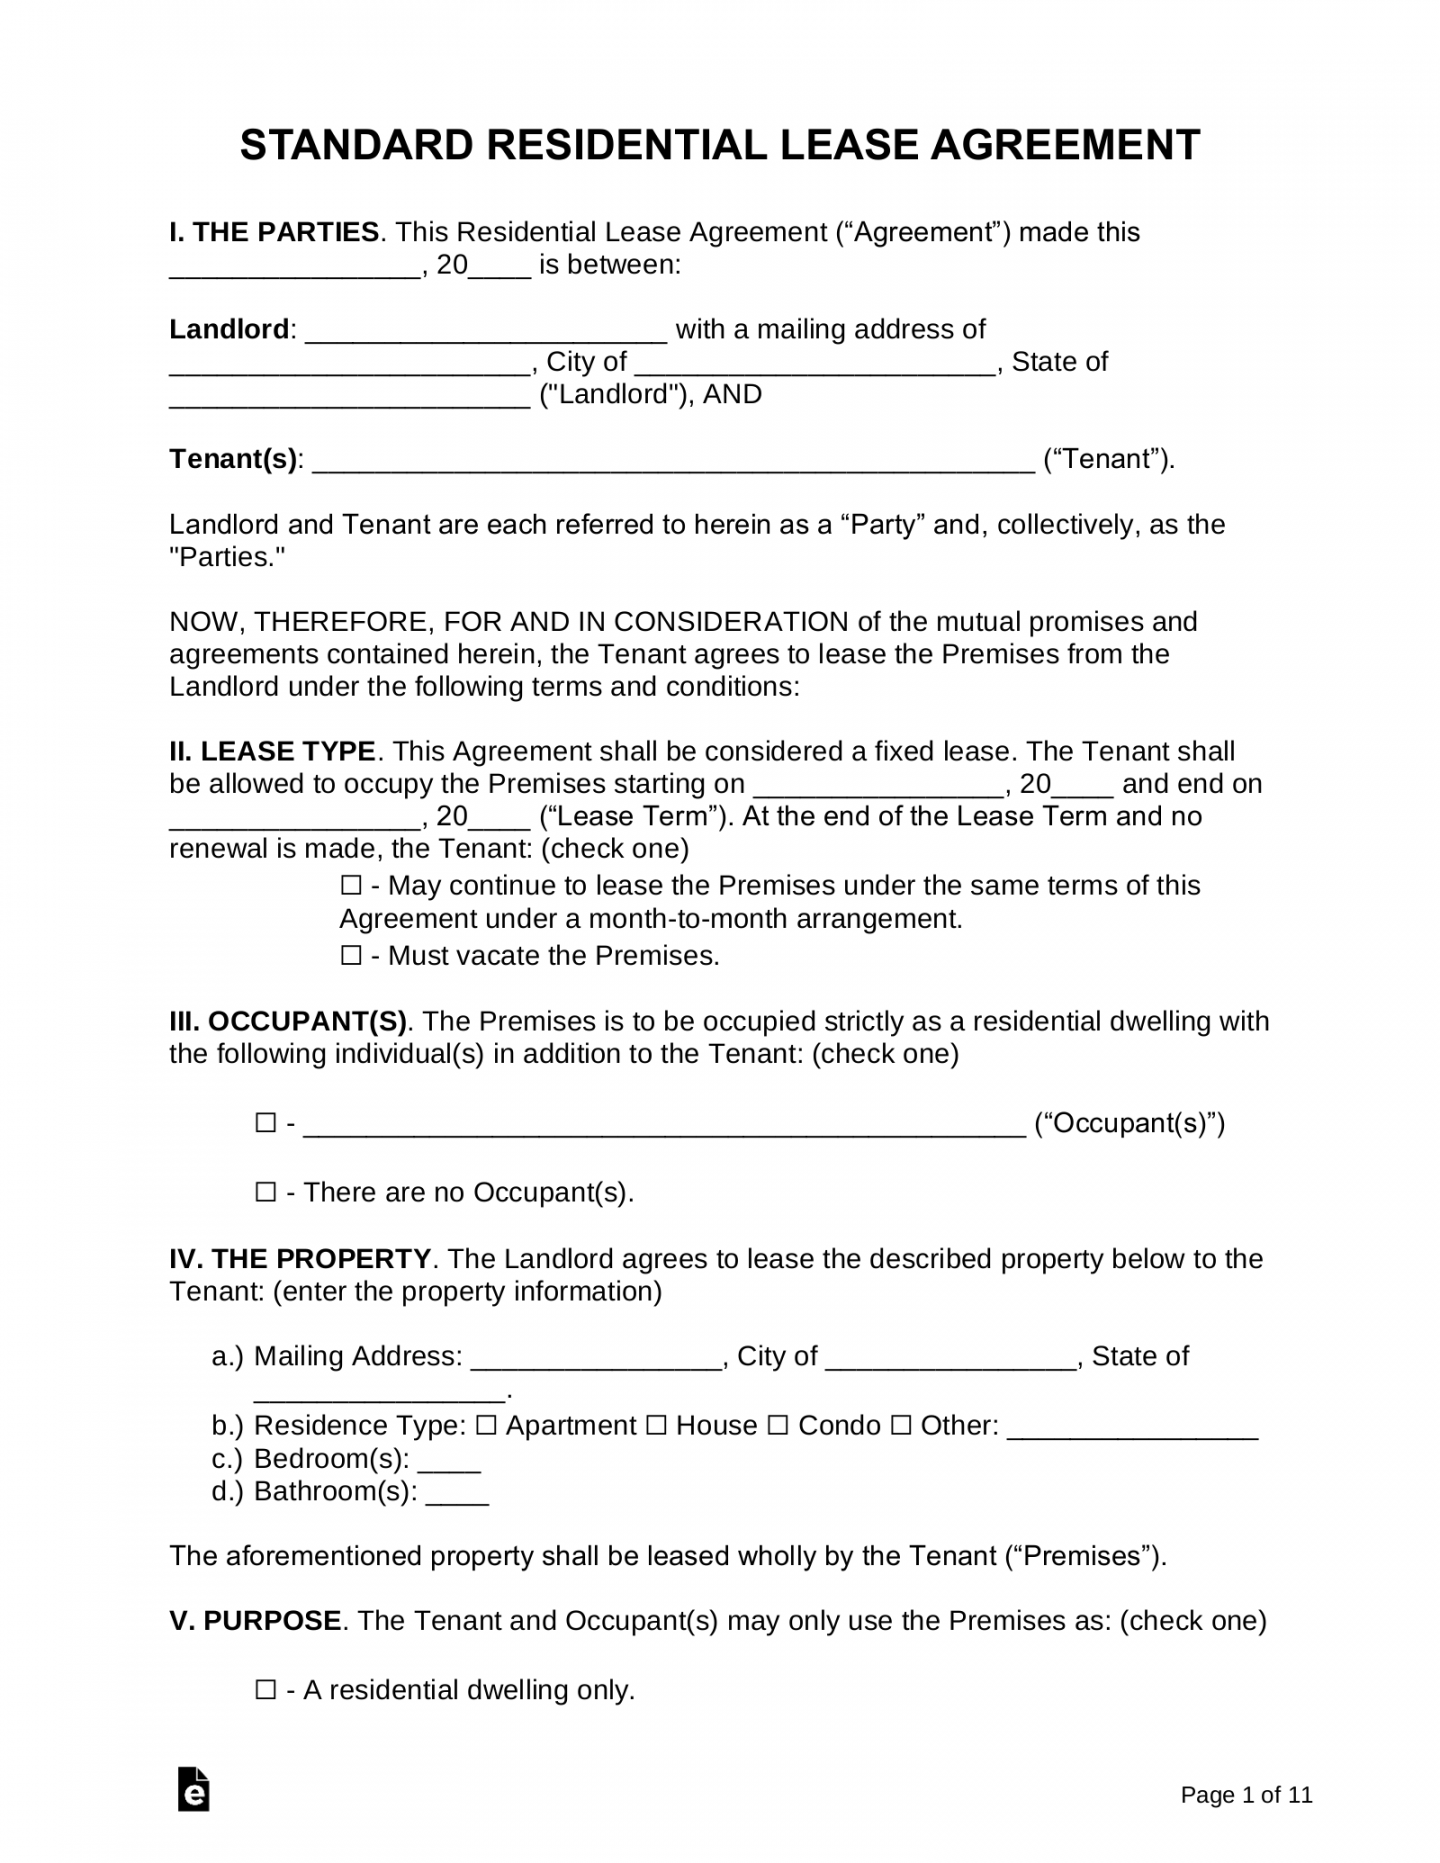 Free Printable Basic Rental Agreement Fillable - Printable - Free Standard Residential Lease Agreement Template - PDF  Word